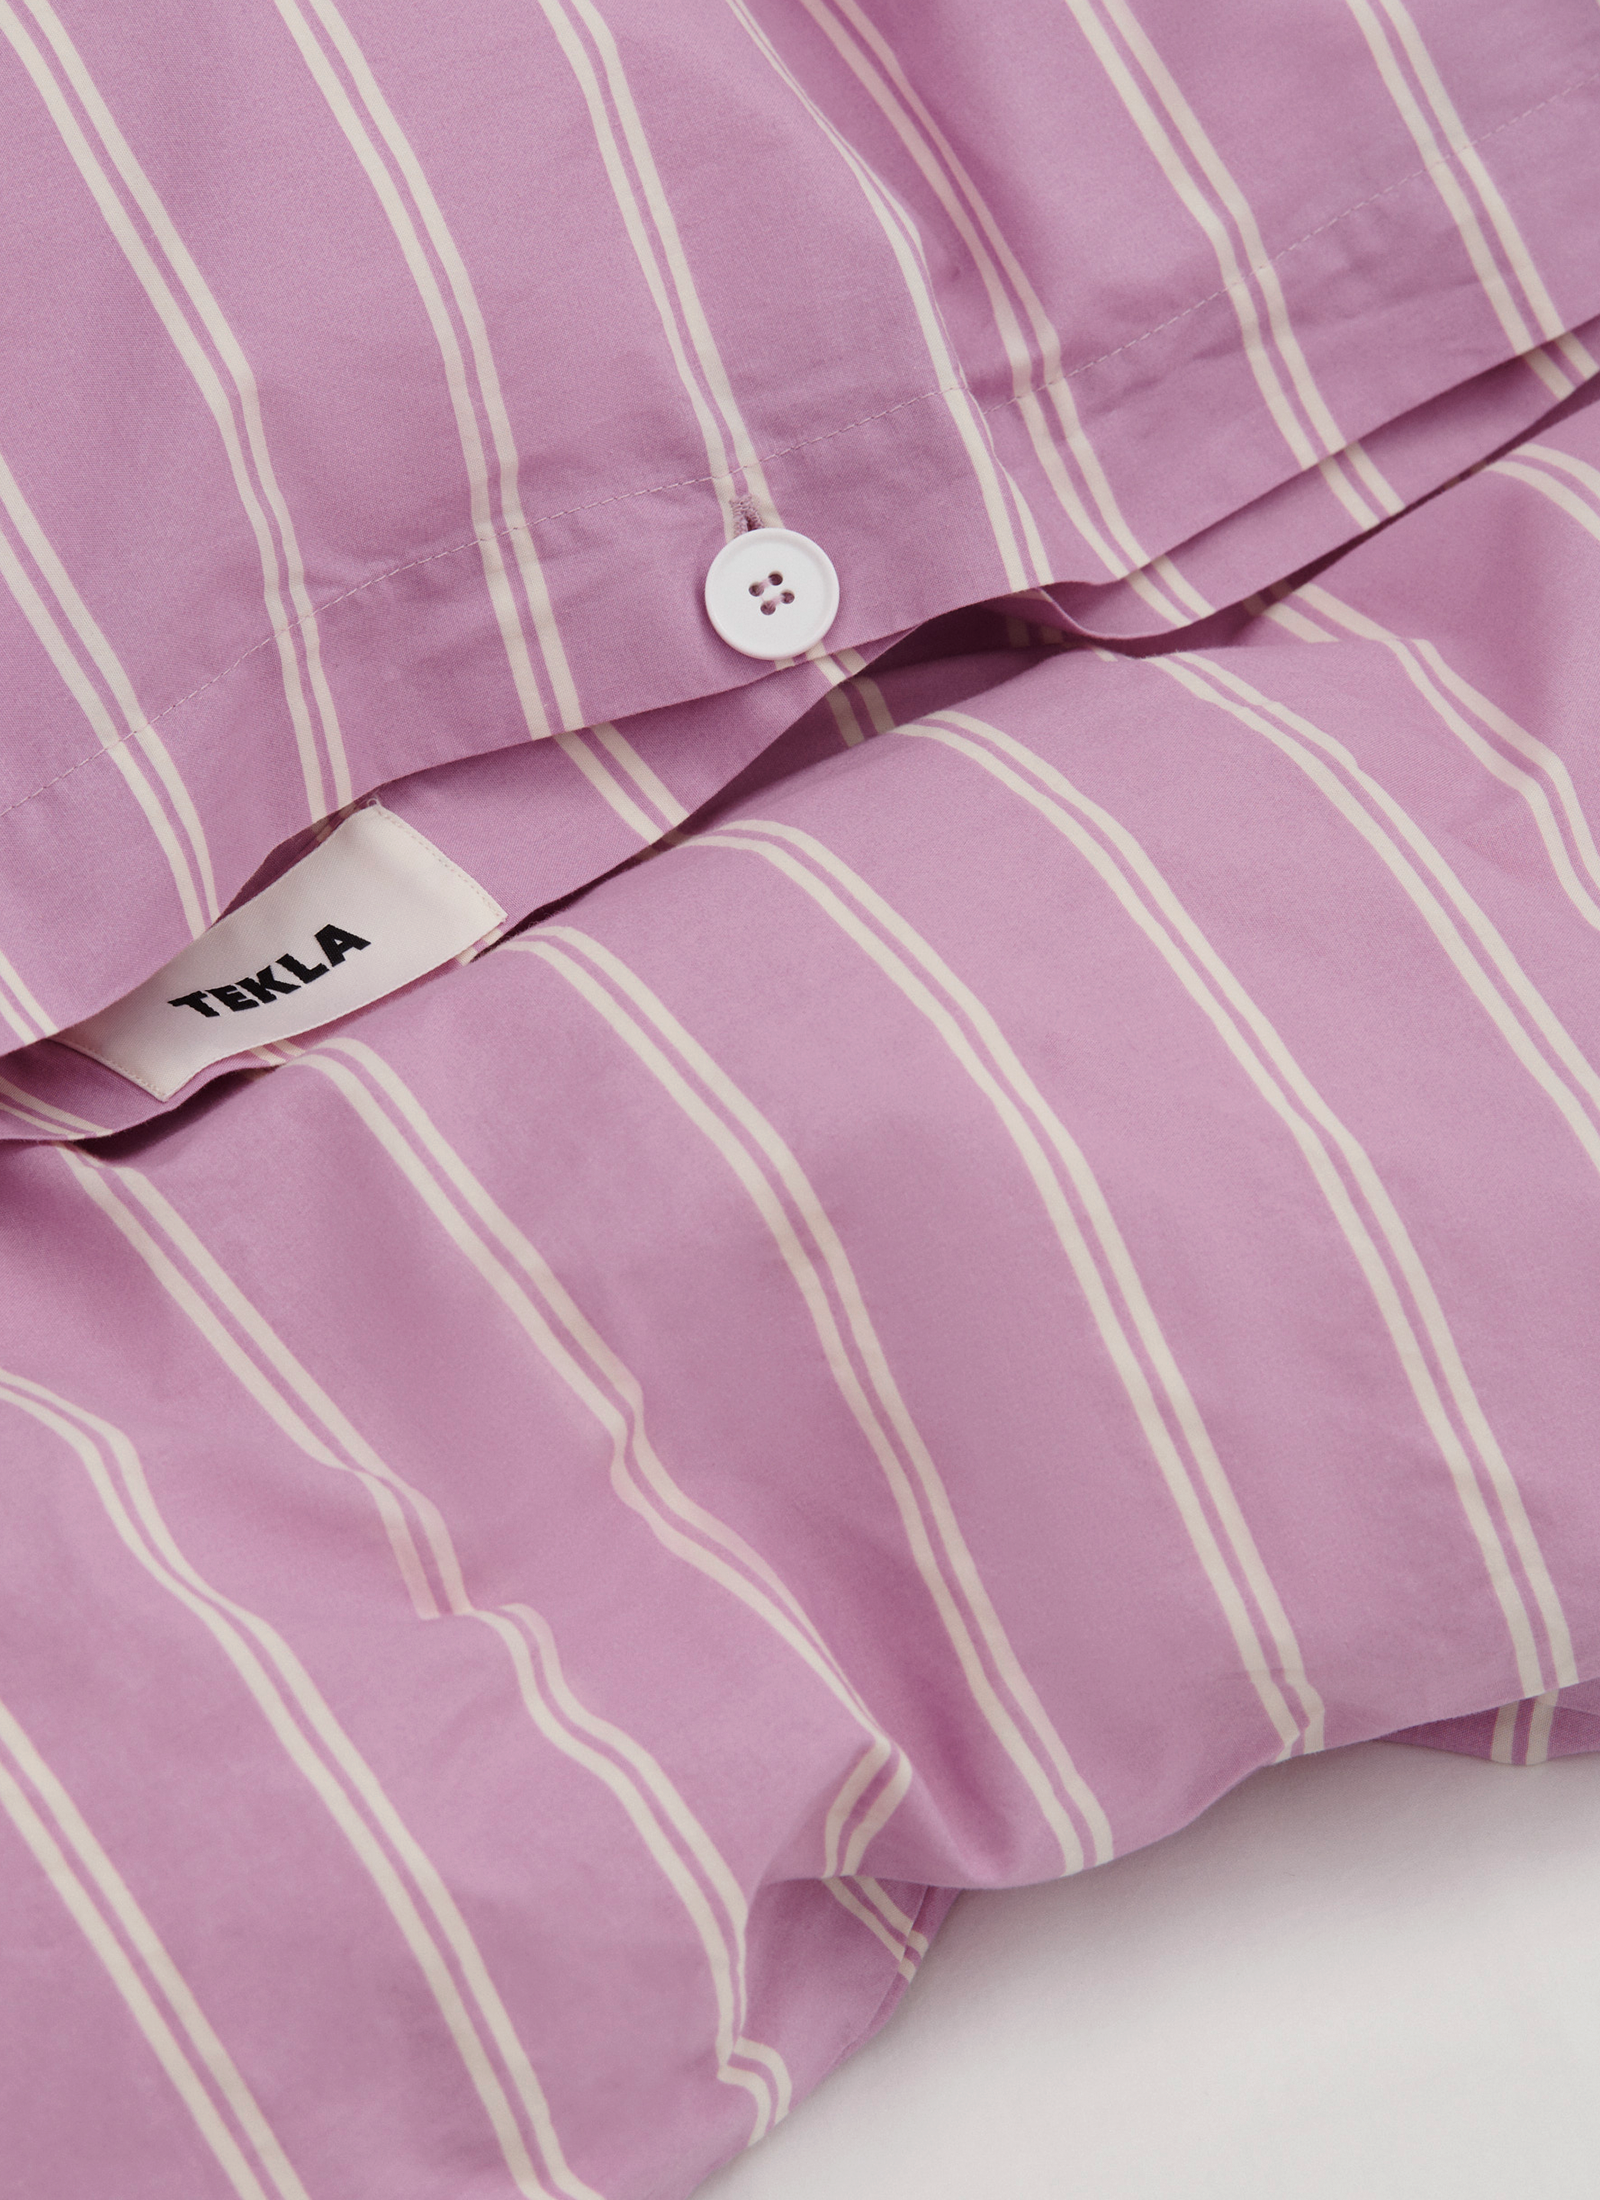 Duvet Cover in Mallow Pink Stripes